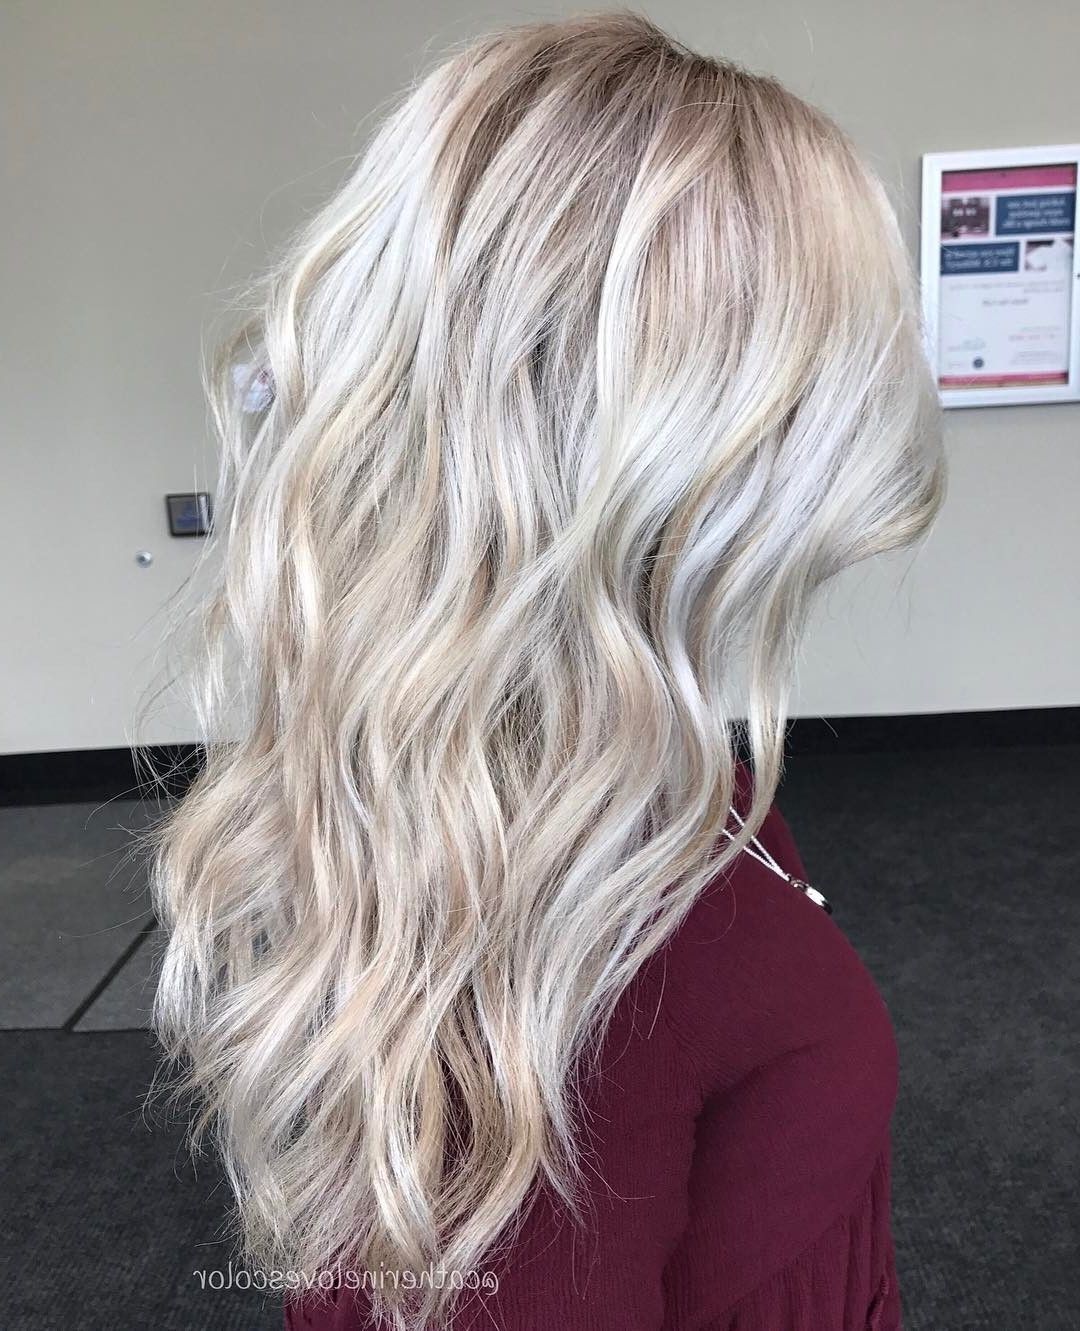 20 Adorable Ash Blonde Hairstyles To Try: Hair Color Ideas 2018 With Regard To Trendy All Over Cool Blonde Hairstyles (View 1 of 20)